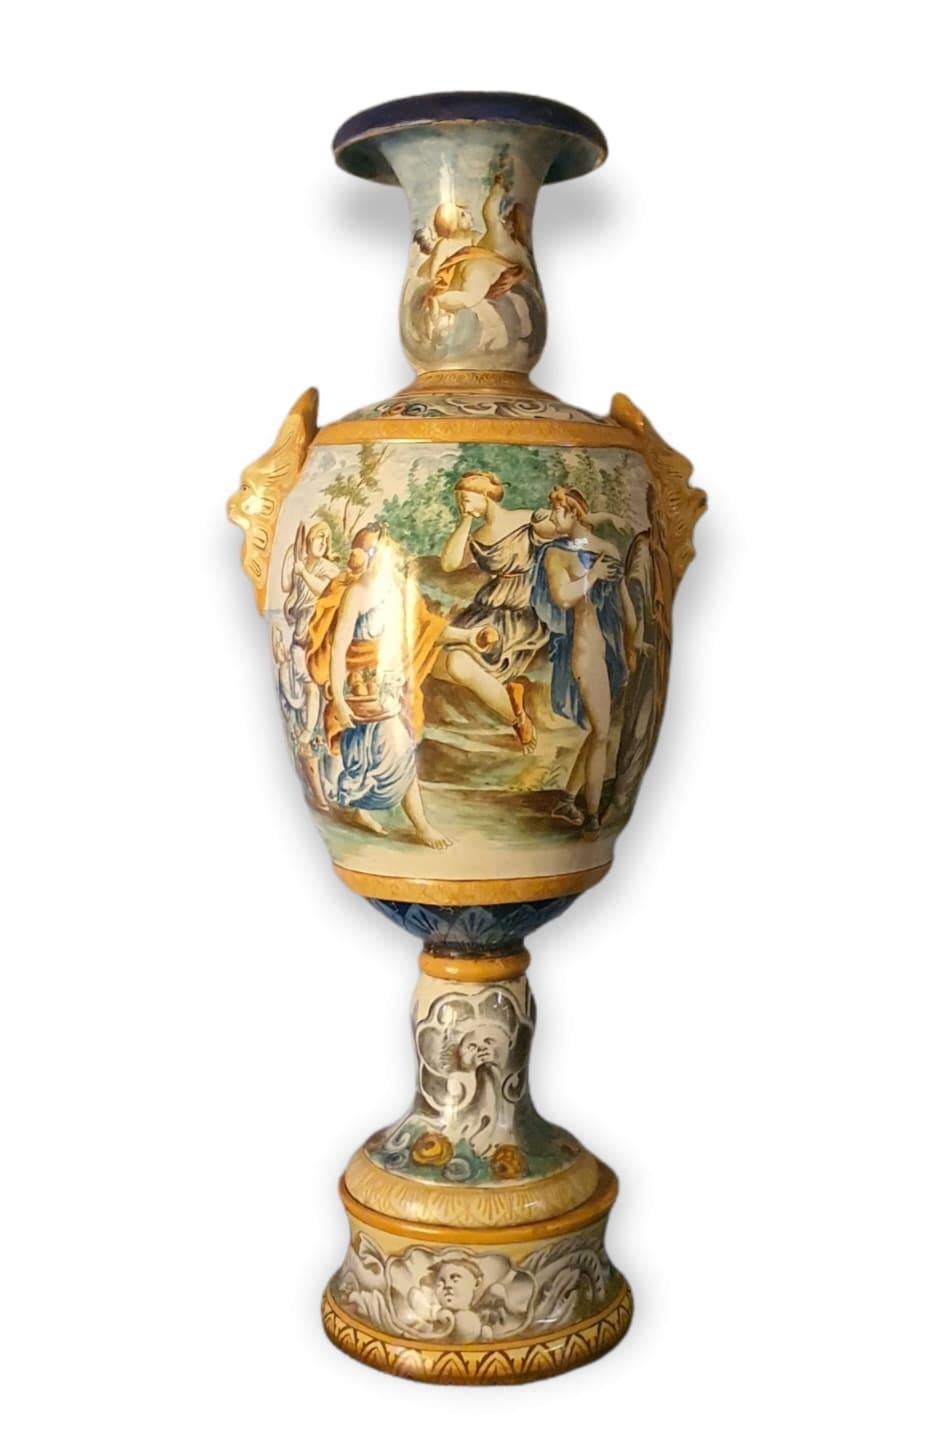 Elegant majolica vase by Castelli. Hand painted, in the round, depicting allegorical scenes.